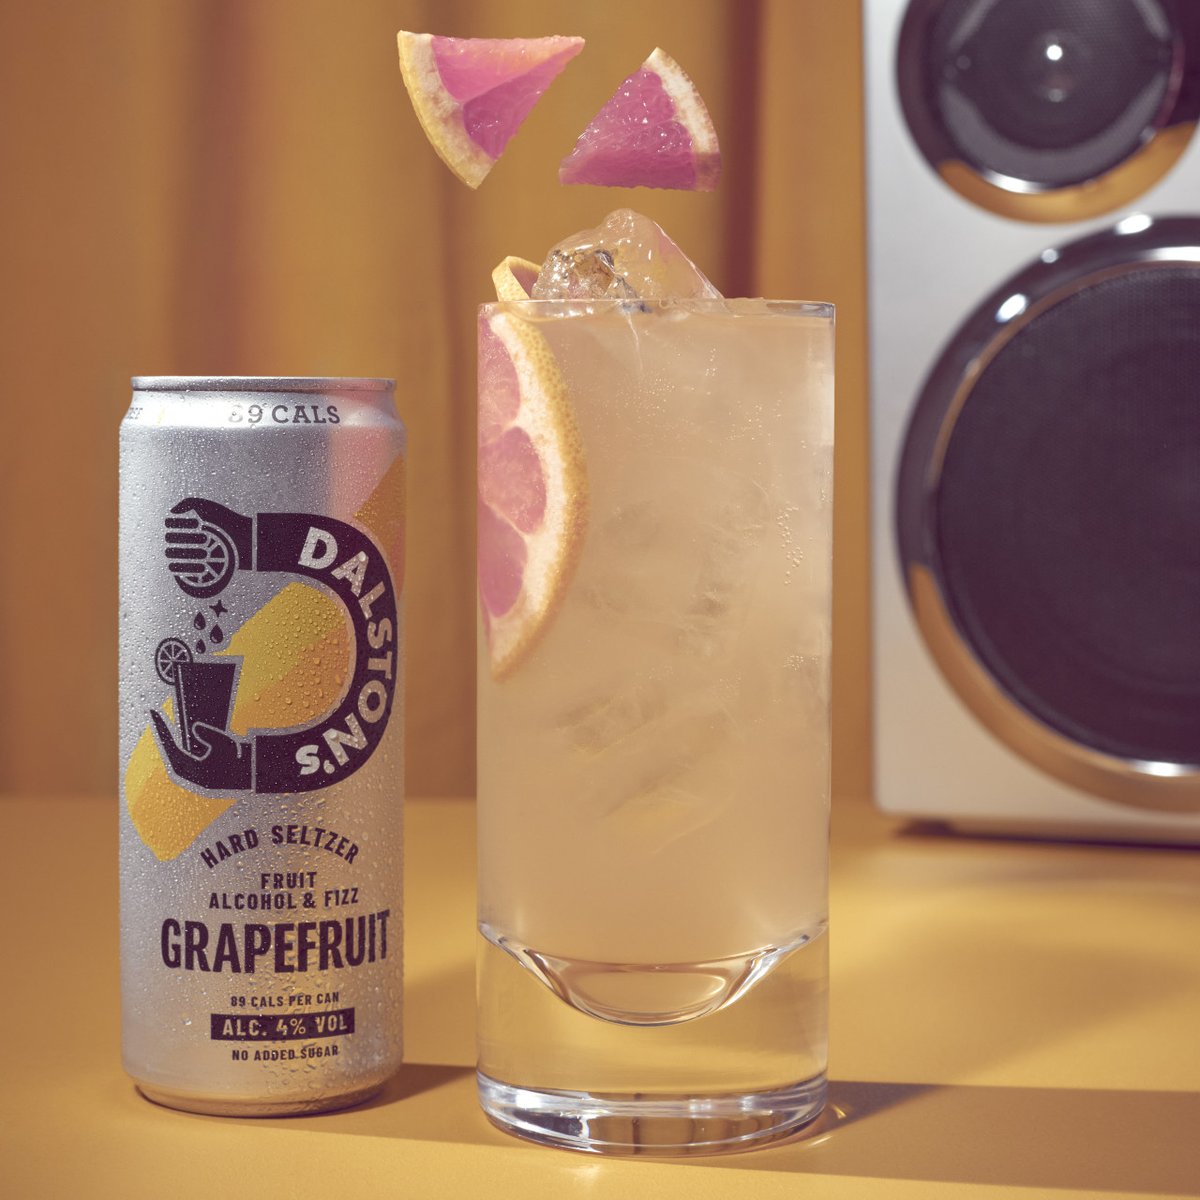 'We already loved Dalston's intensely fruity sodas. Now they've merged their seltzers with triple-distilled spirit to join the 'hard' movement.' @TimeOutLondon Read the full article > timeout.com/london/news/ea… #hardseltzers #boozewithbalance